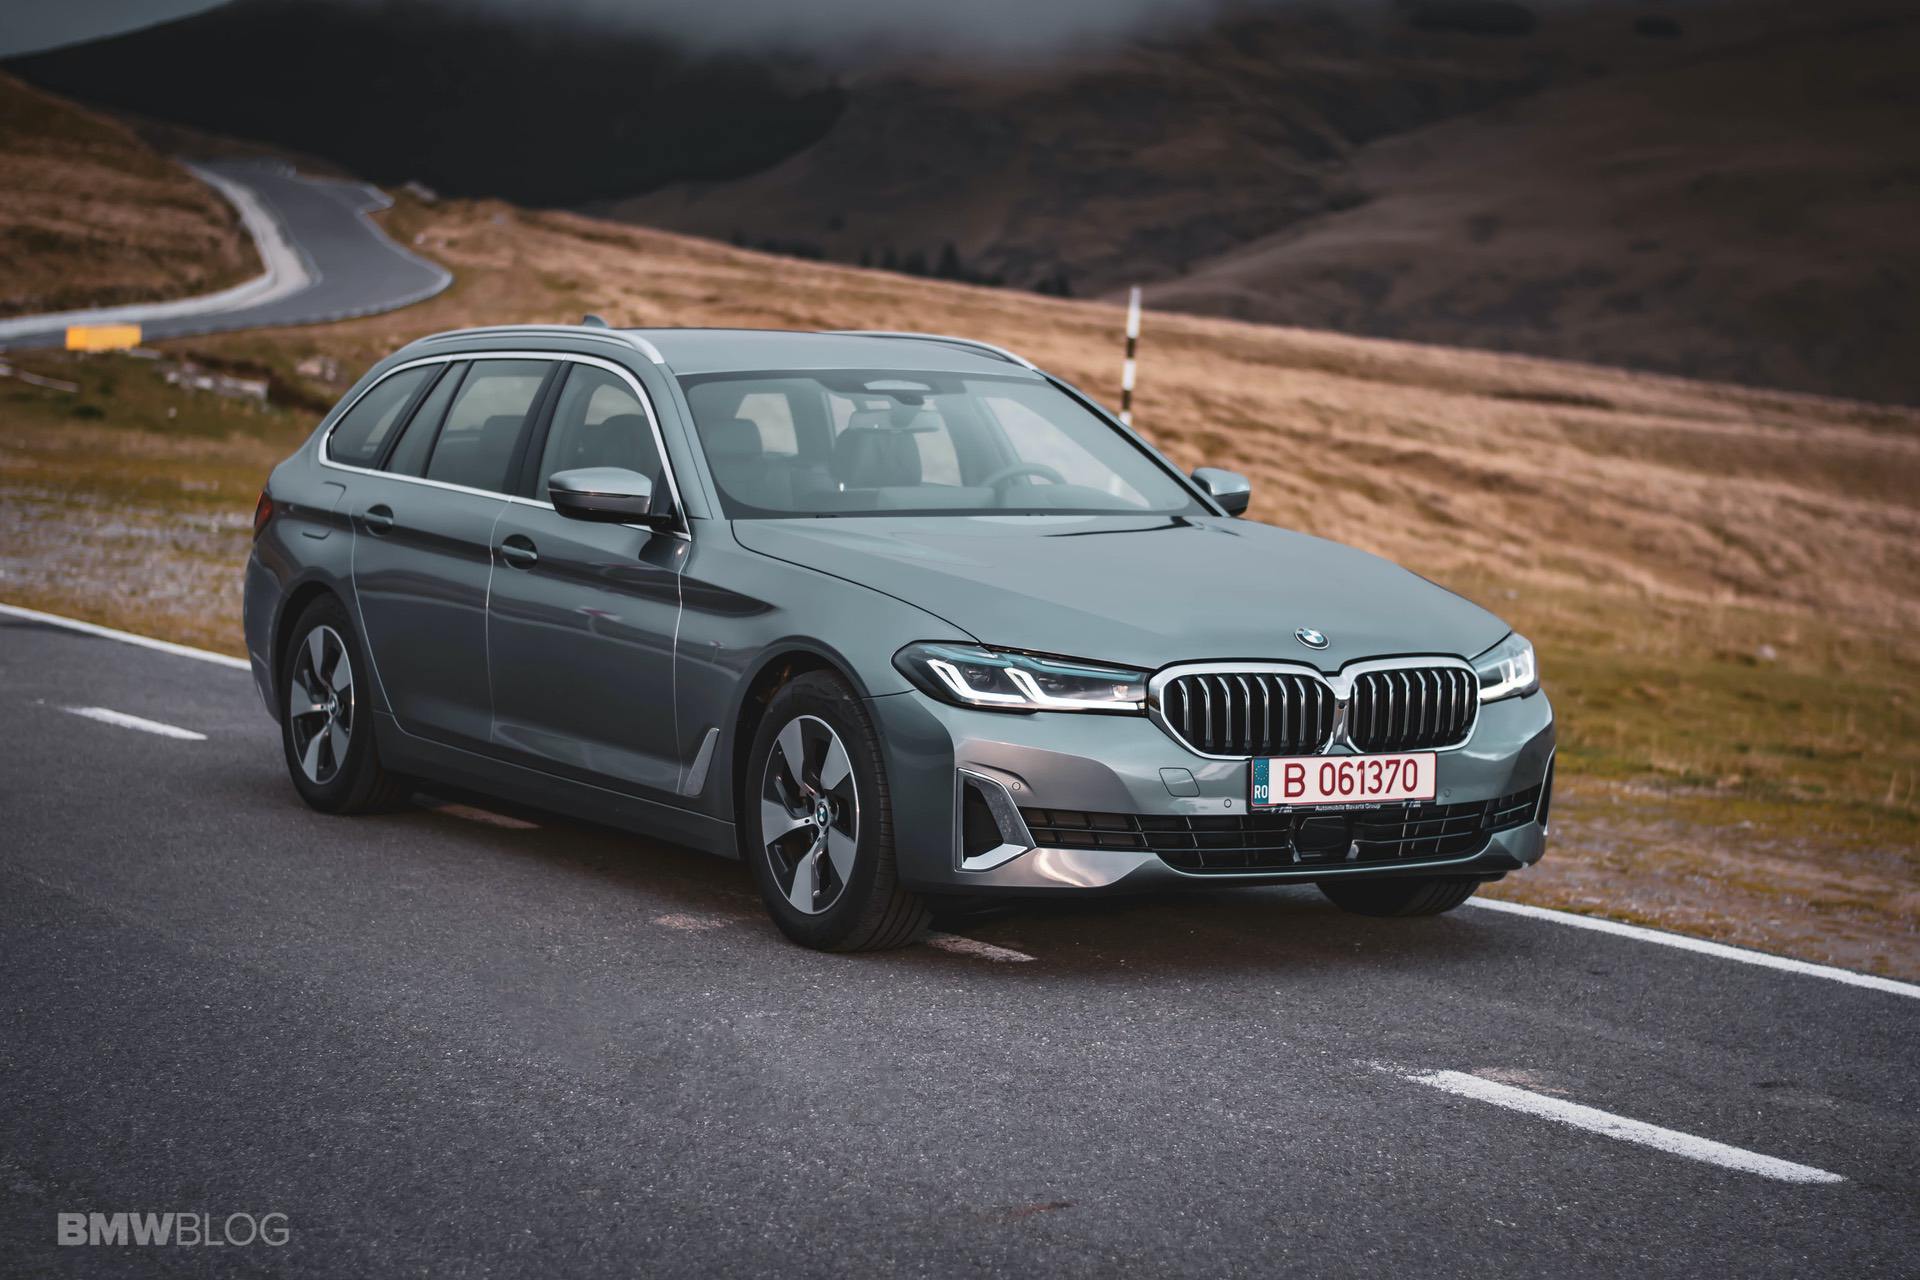 VIDEO: Is the BMW 530d Touring the Most Complete BMW?